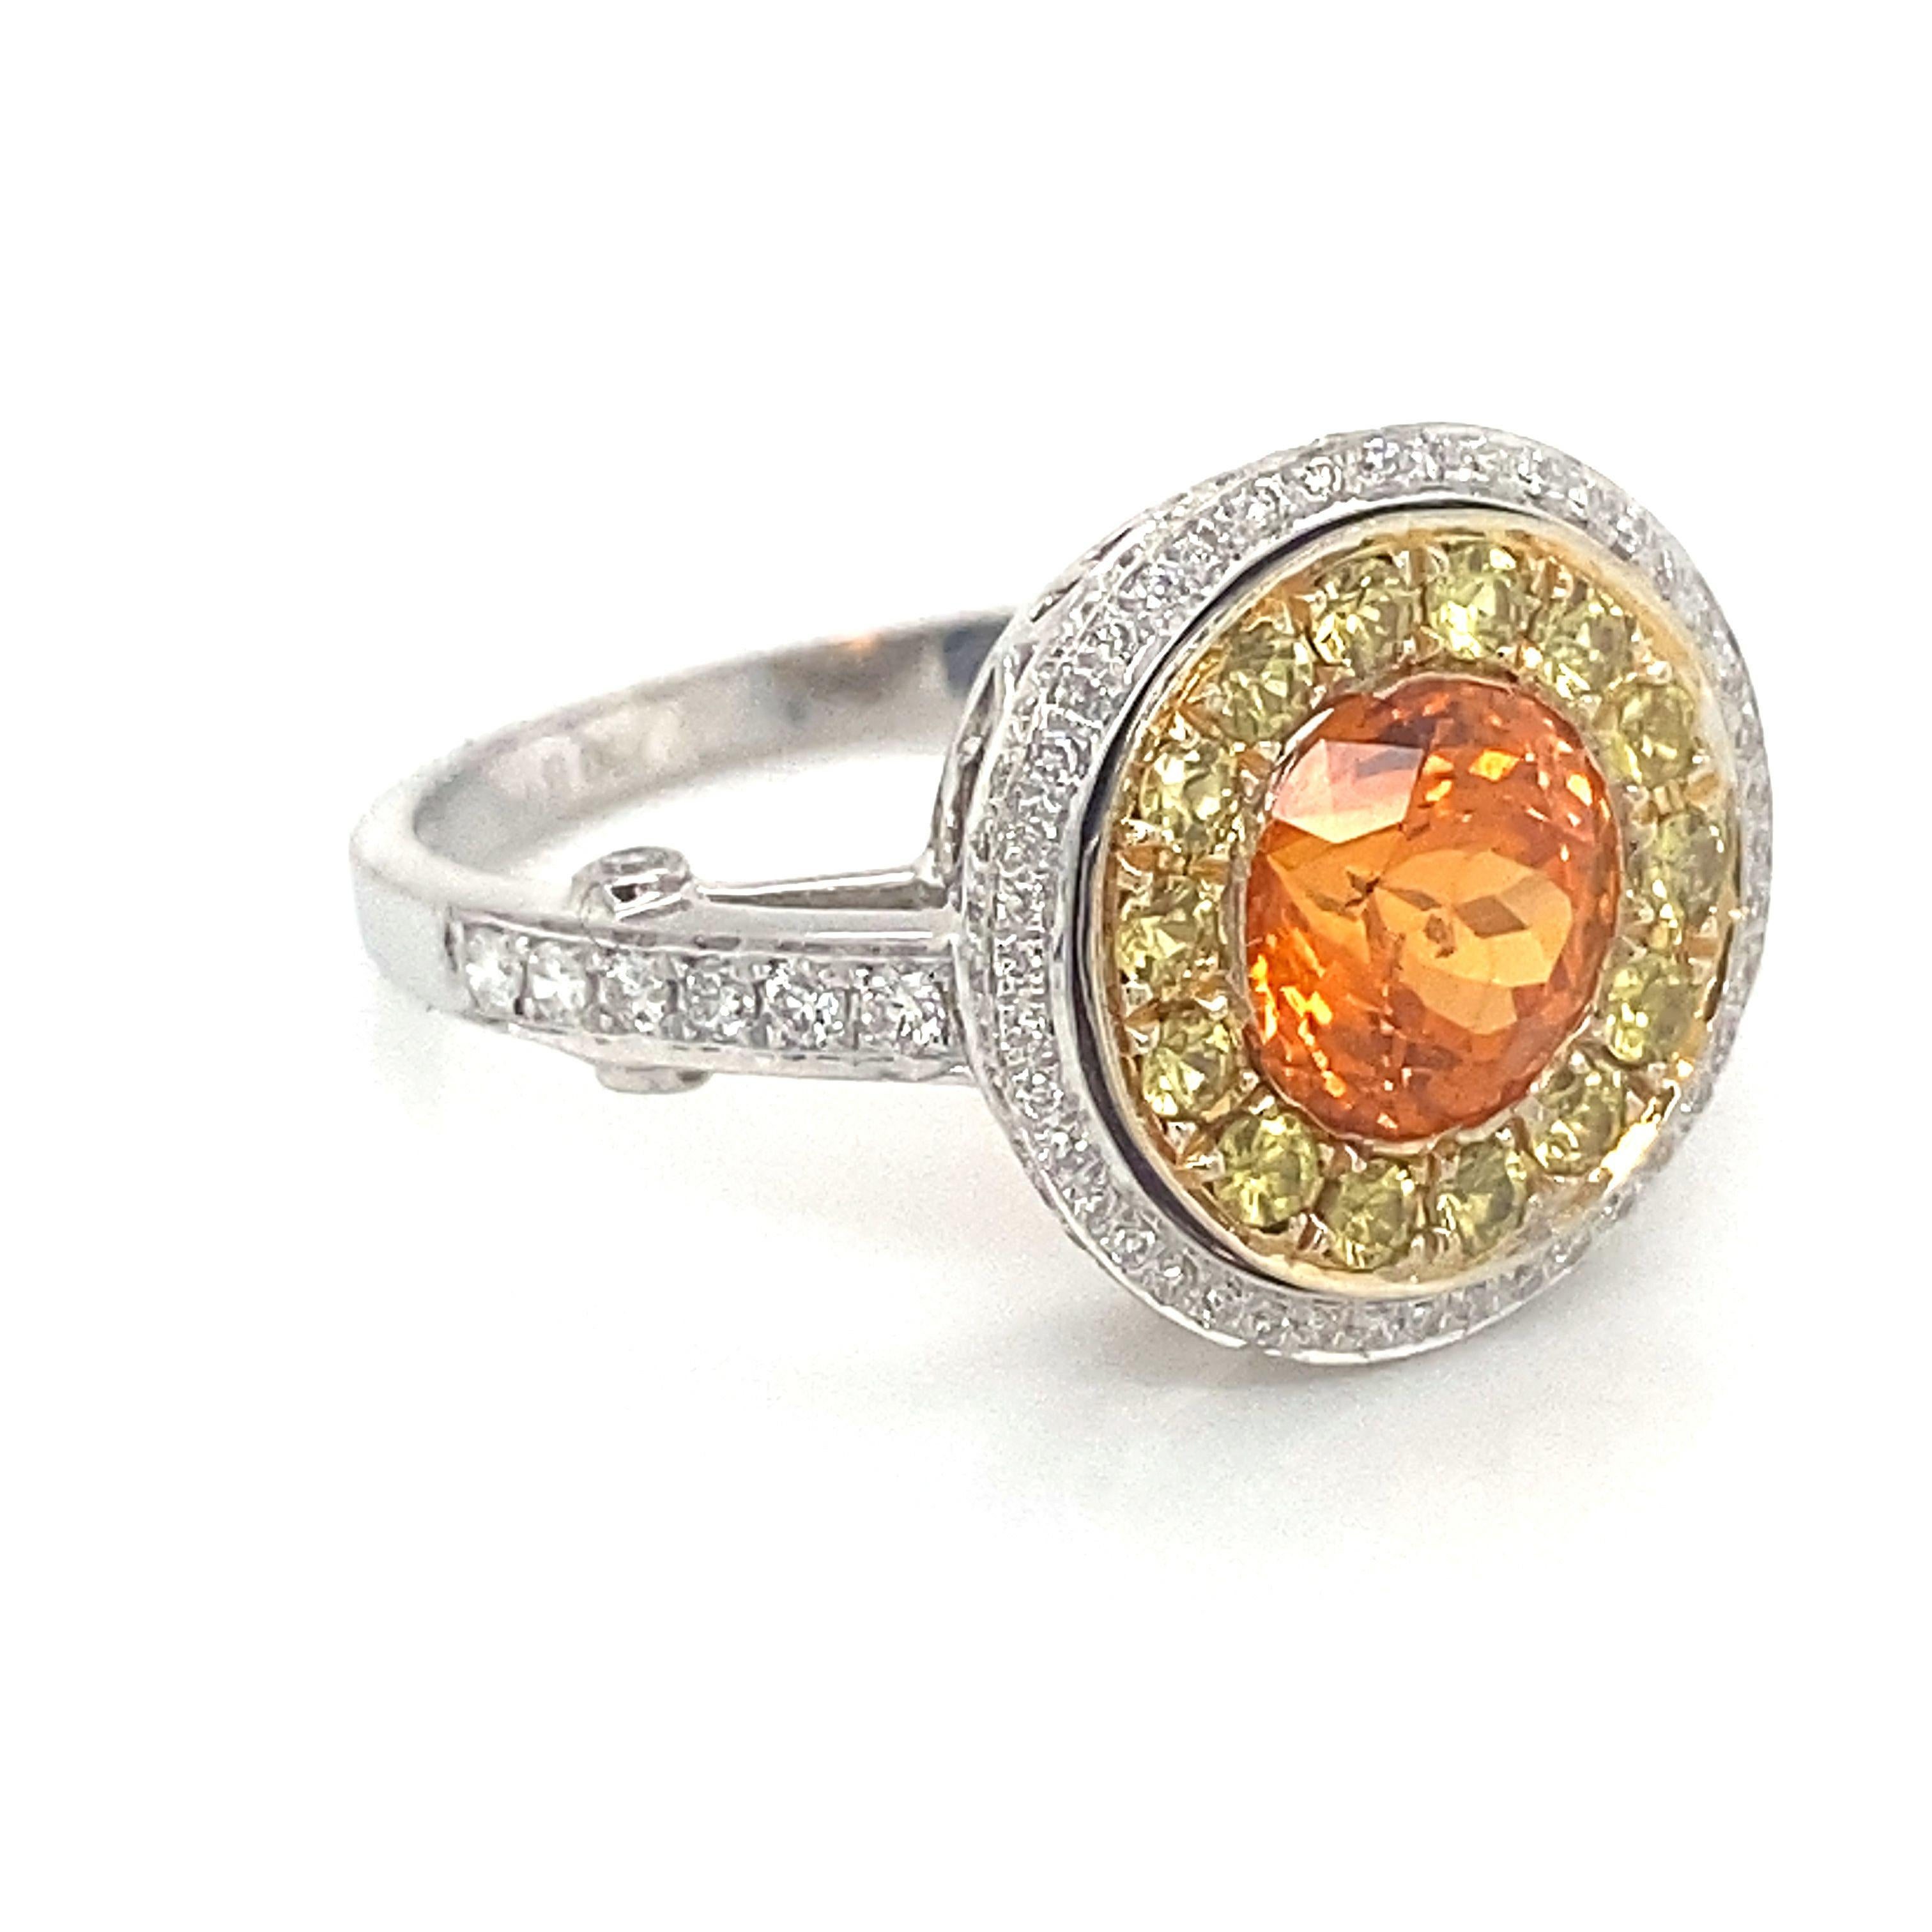 A strikingly vibrant orange spessartine garnet set within yellow and white diamonds in an 18k white gold ring, size 7.25 (sizeable). The garnet weighs 1.91 cts and the yellow diamonds are approximately 0.32 ctw (measured in setting). 